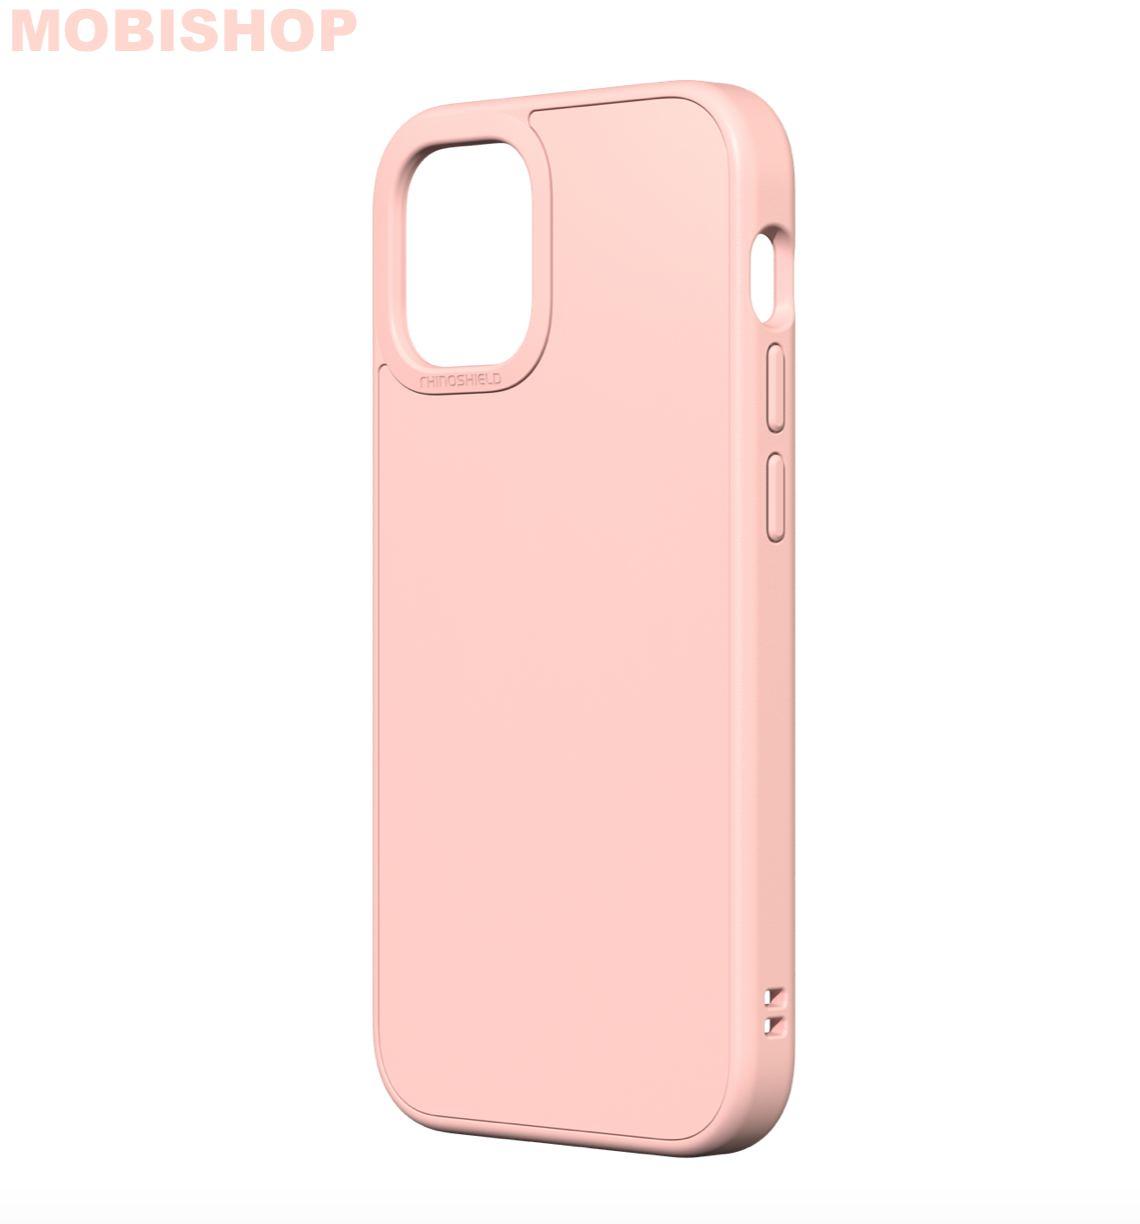 Coque Rhinoshield Solidsuit rose iPhone 12 / 12 Pro - Protection iPhone  iPad AirPods/iPhone 12 / 12 Pro - Mobishop Saint-Etienne